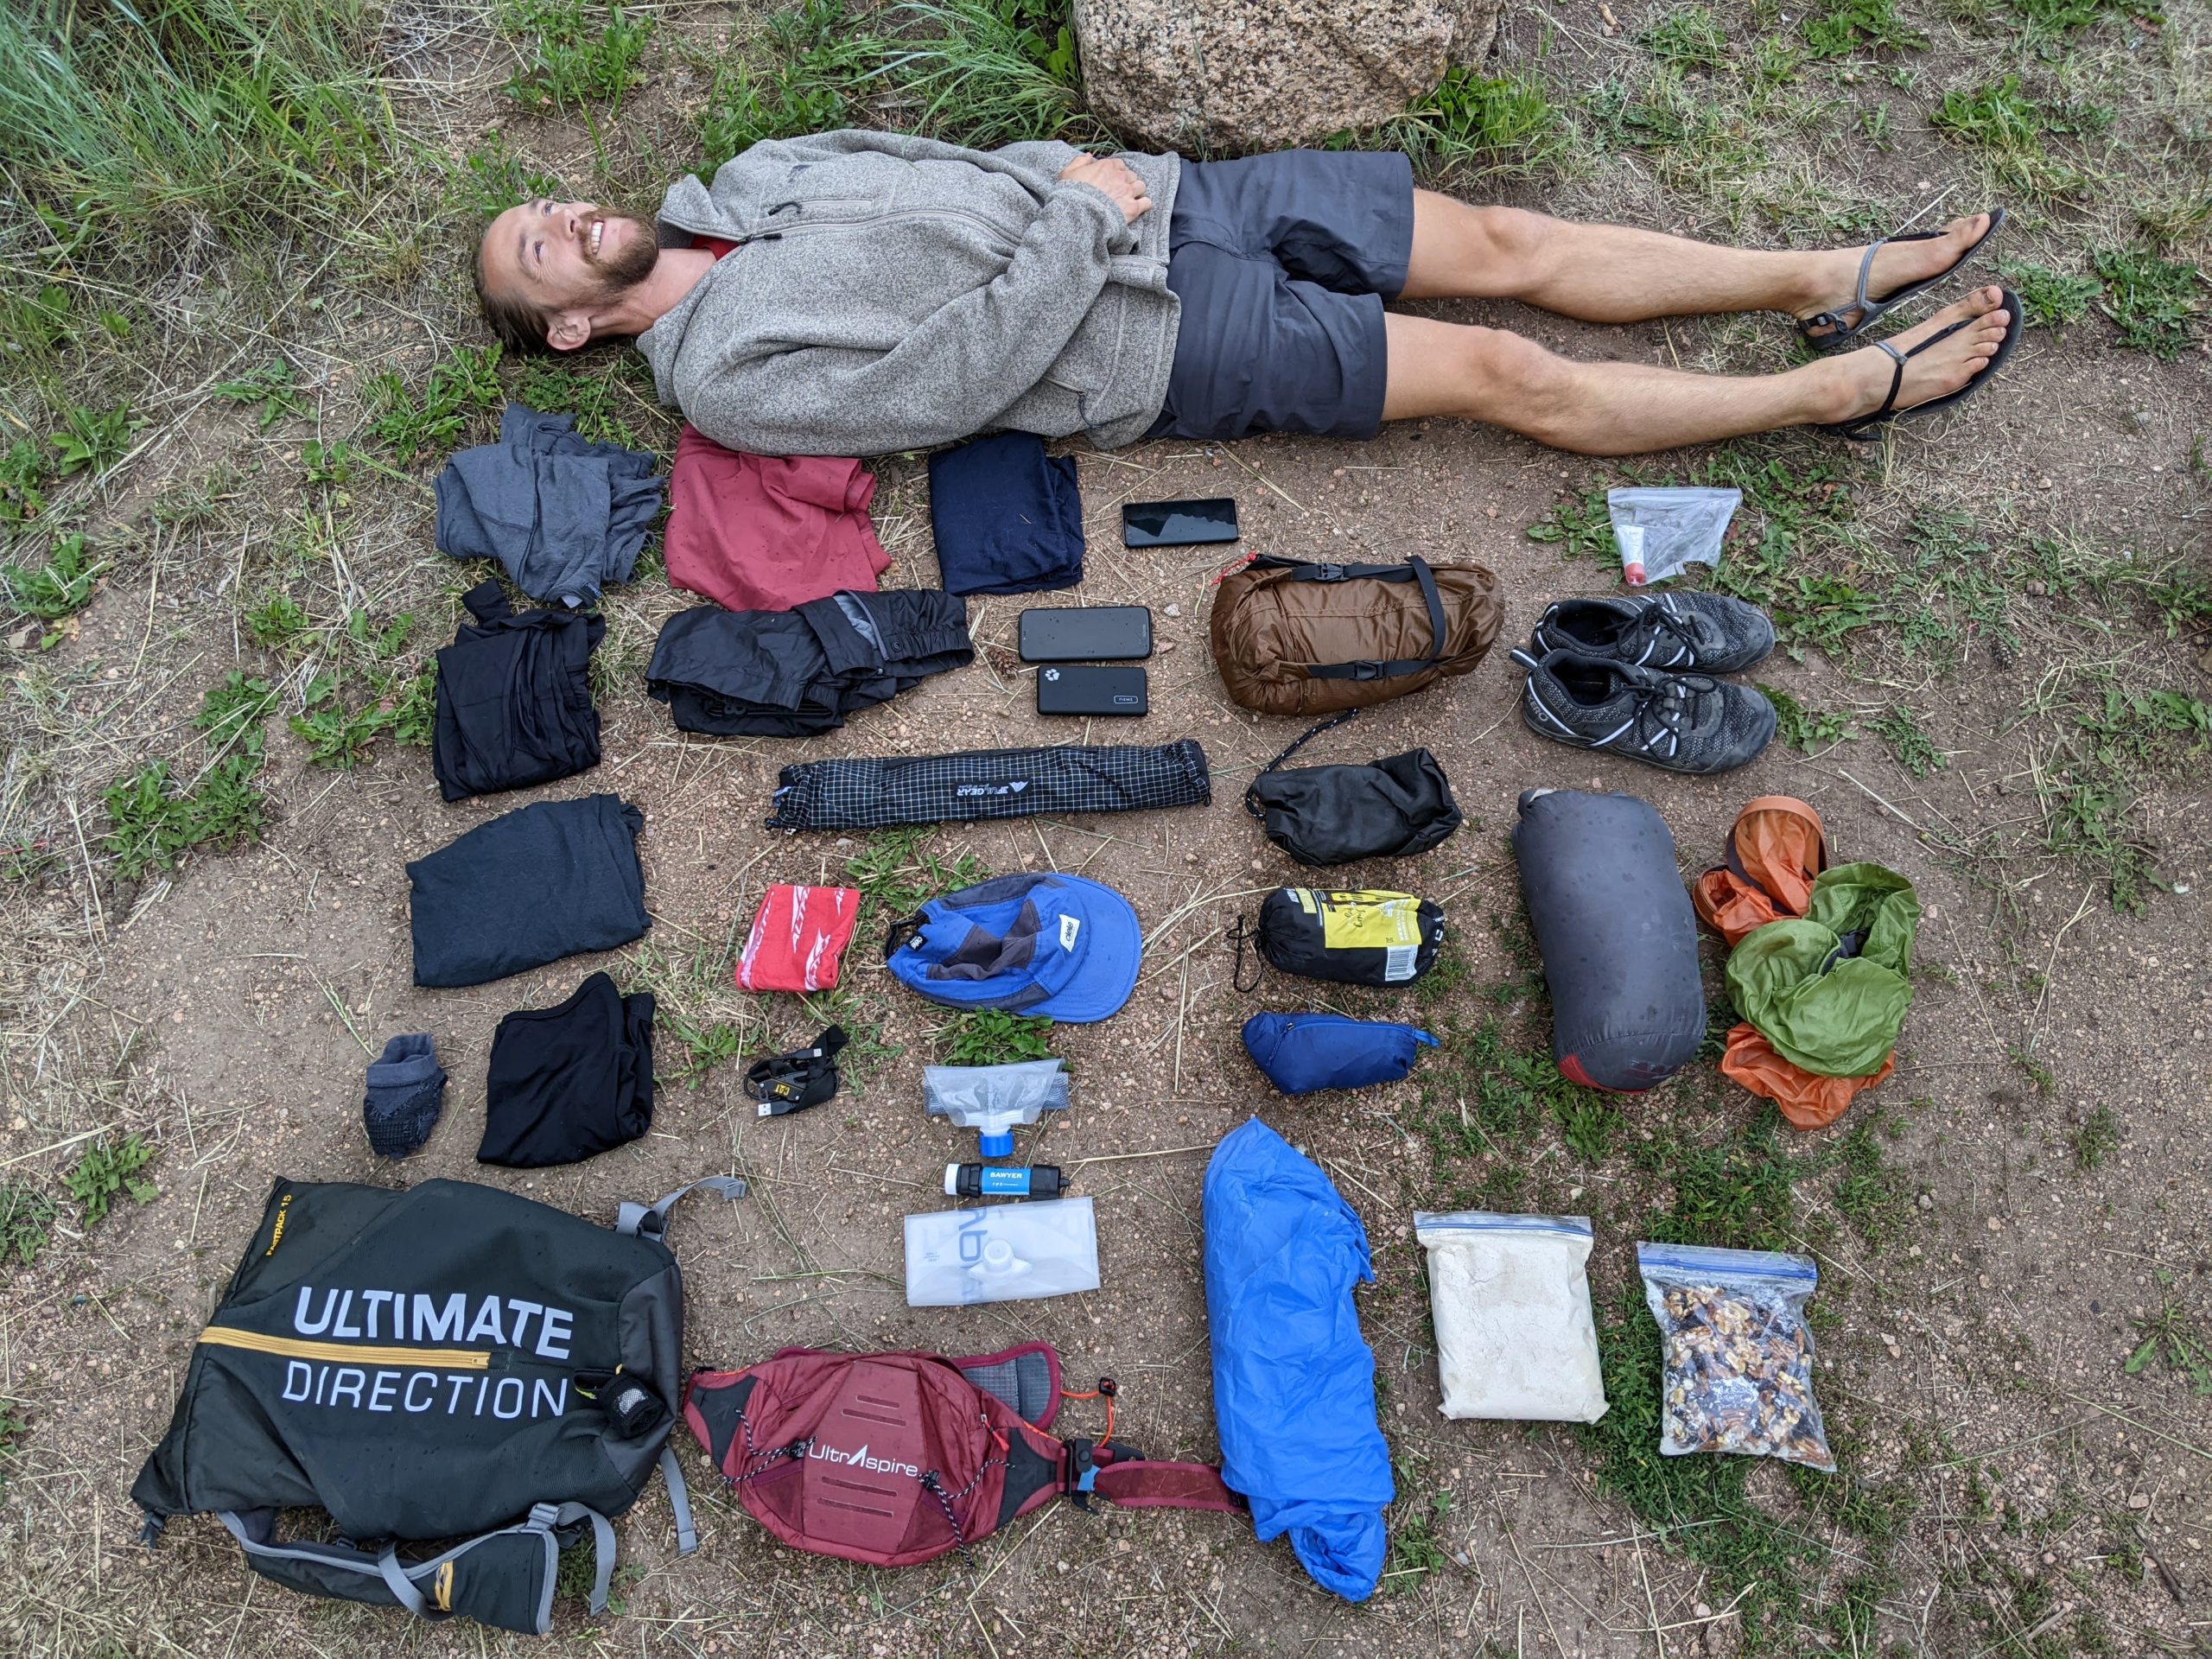 Colorado Packing List for Summer - What to Pack for Summer Hiking